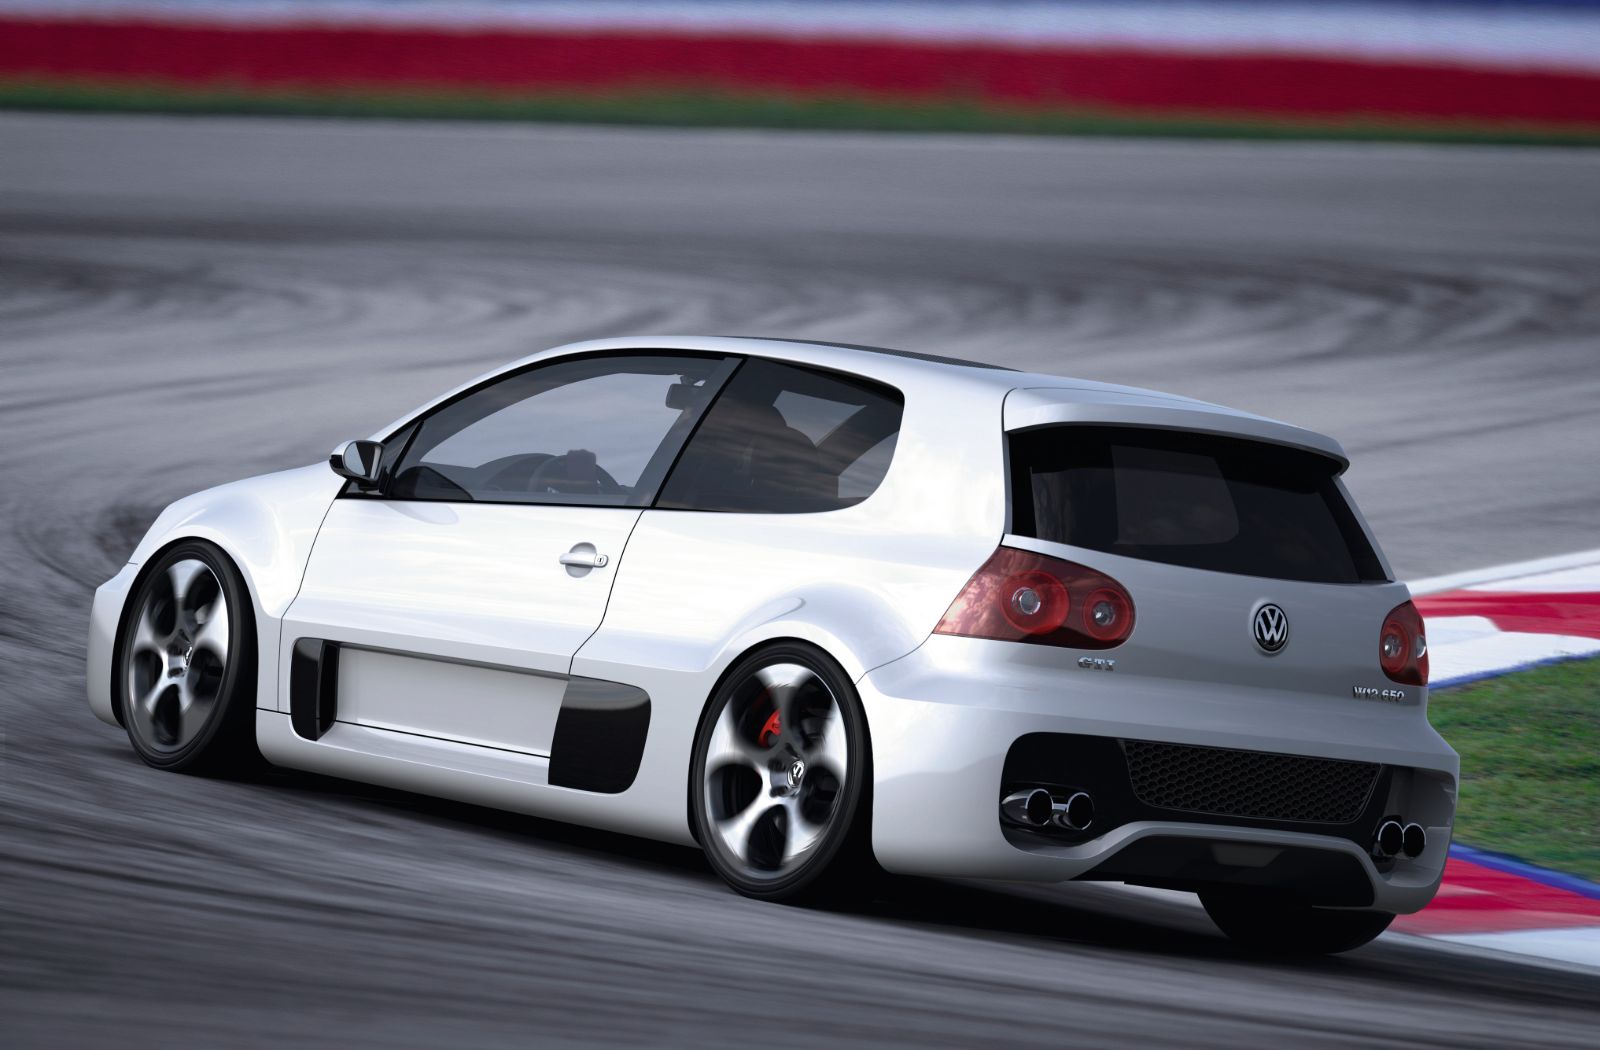 Here Are Five Interesting Facts About the VW Golf You Probably